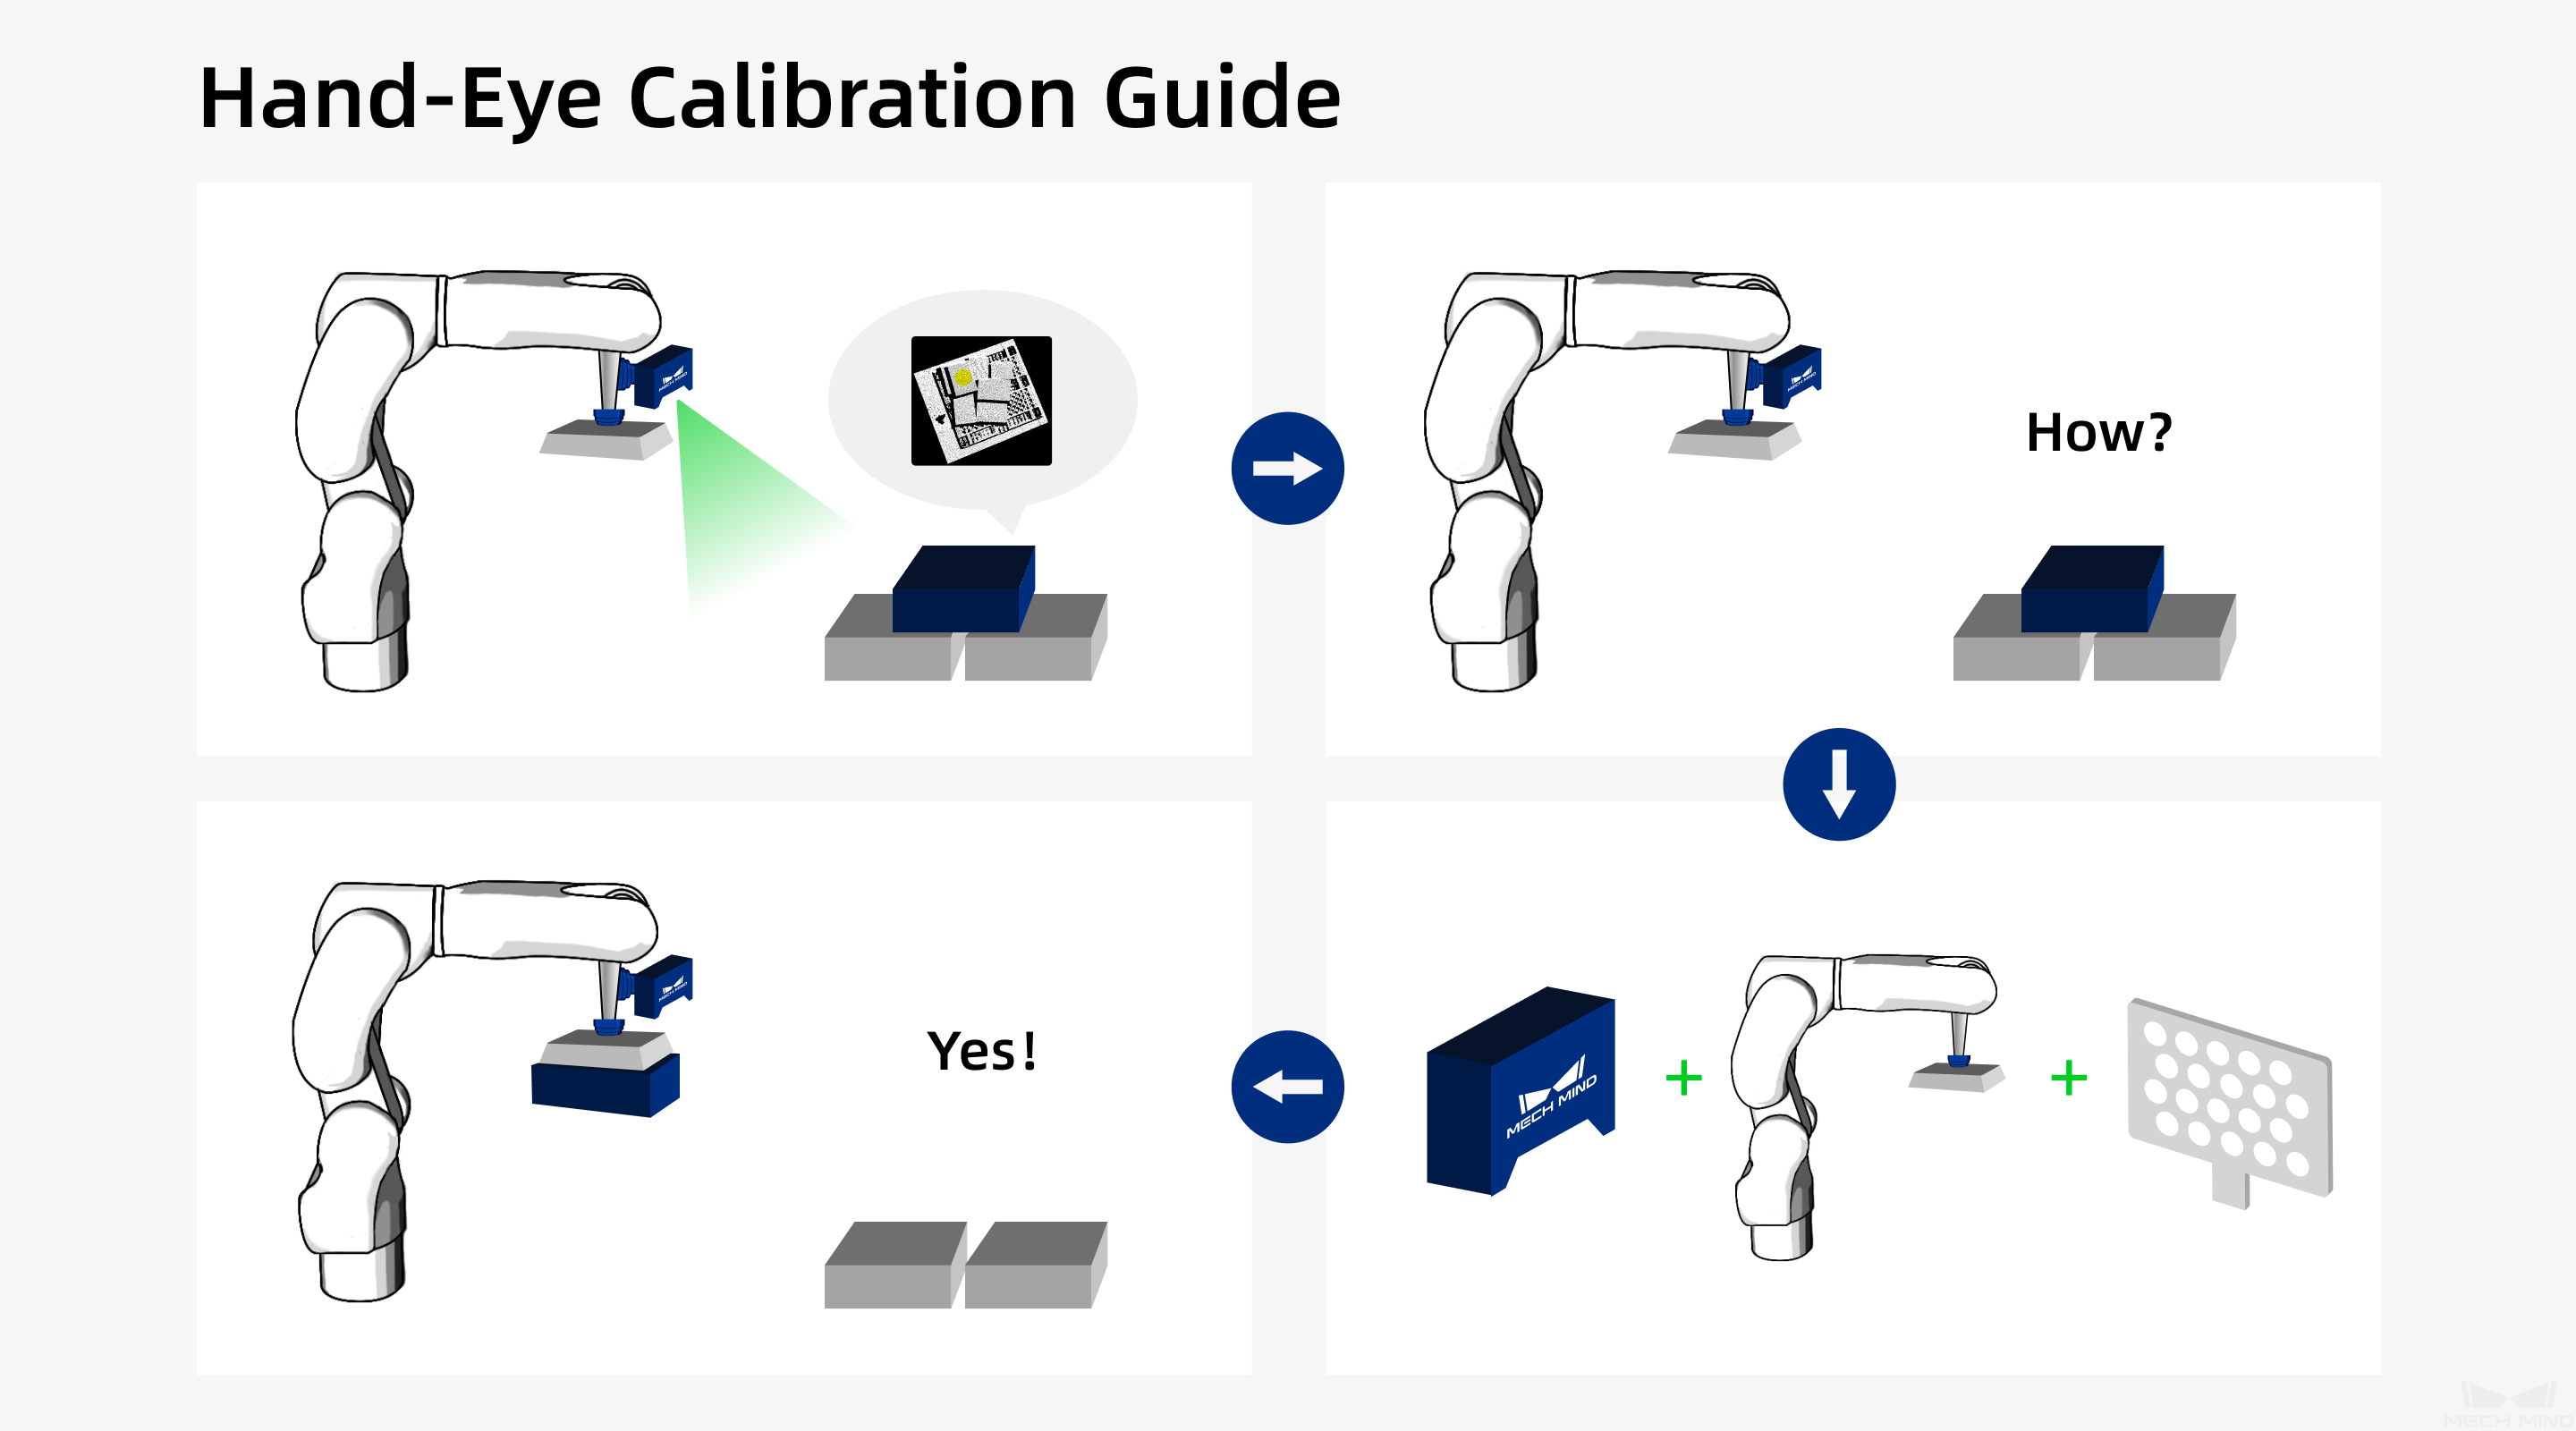 ../../_images/calibration_guide_1.png